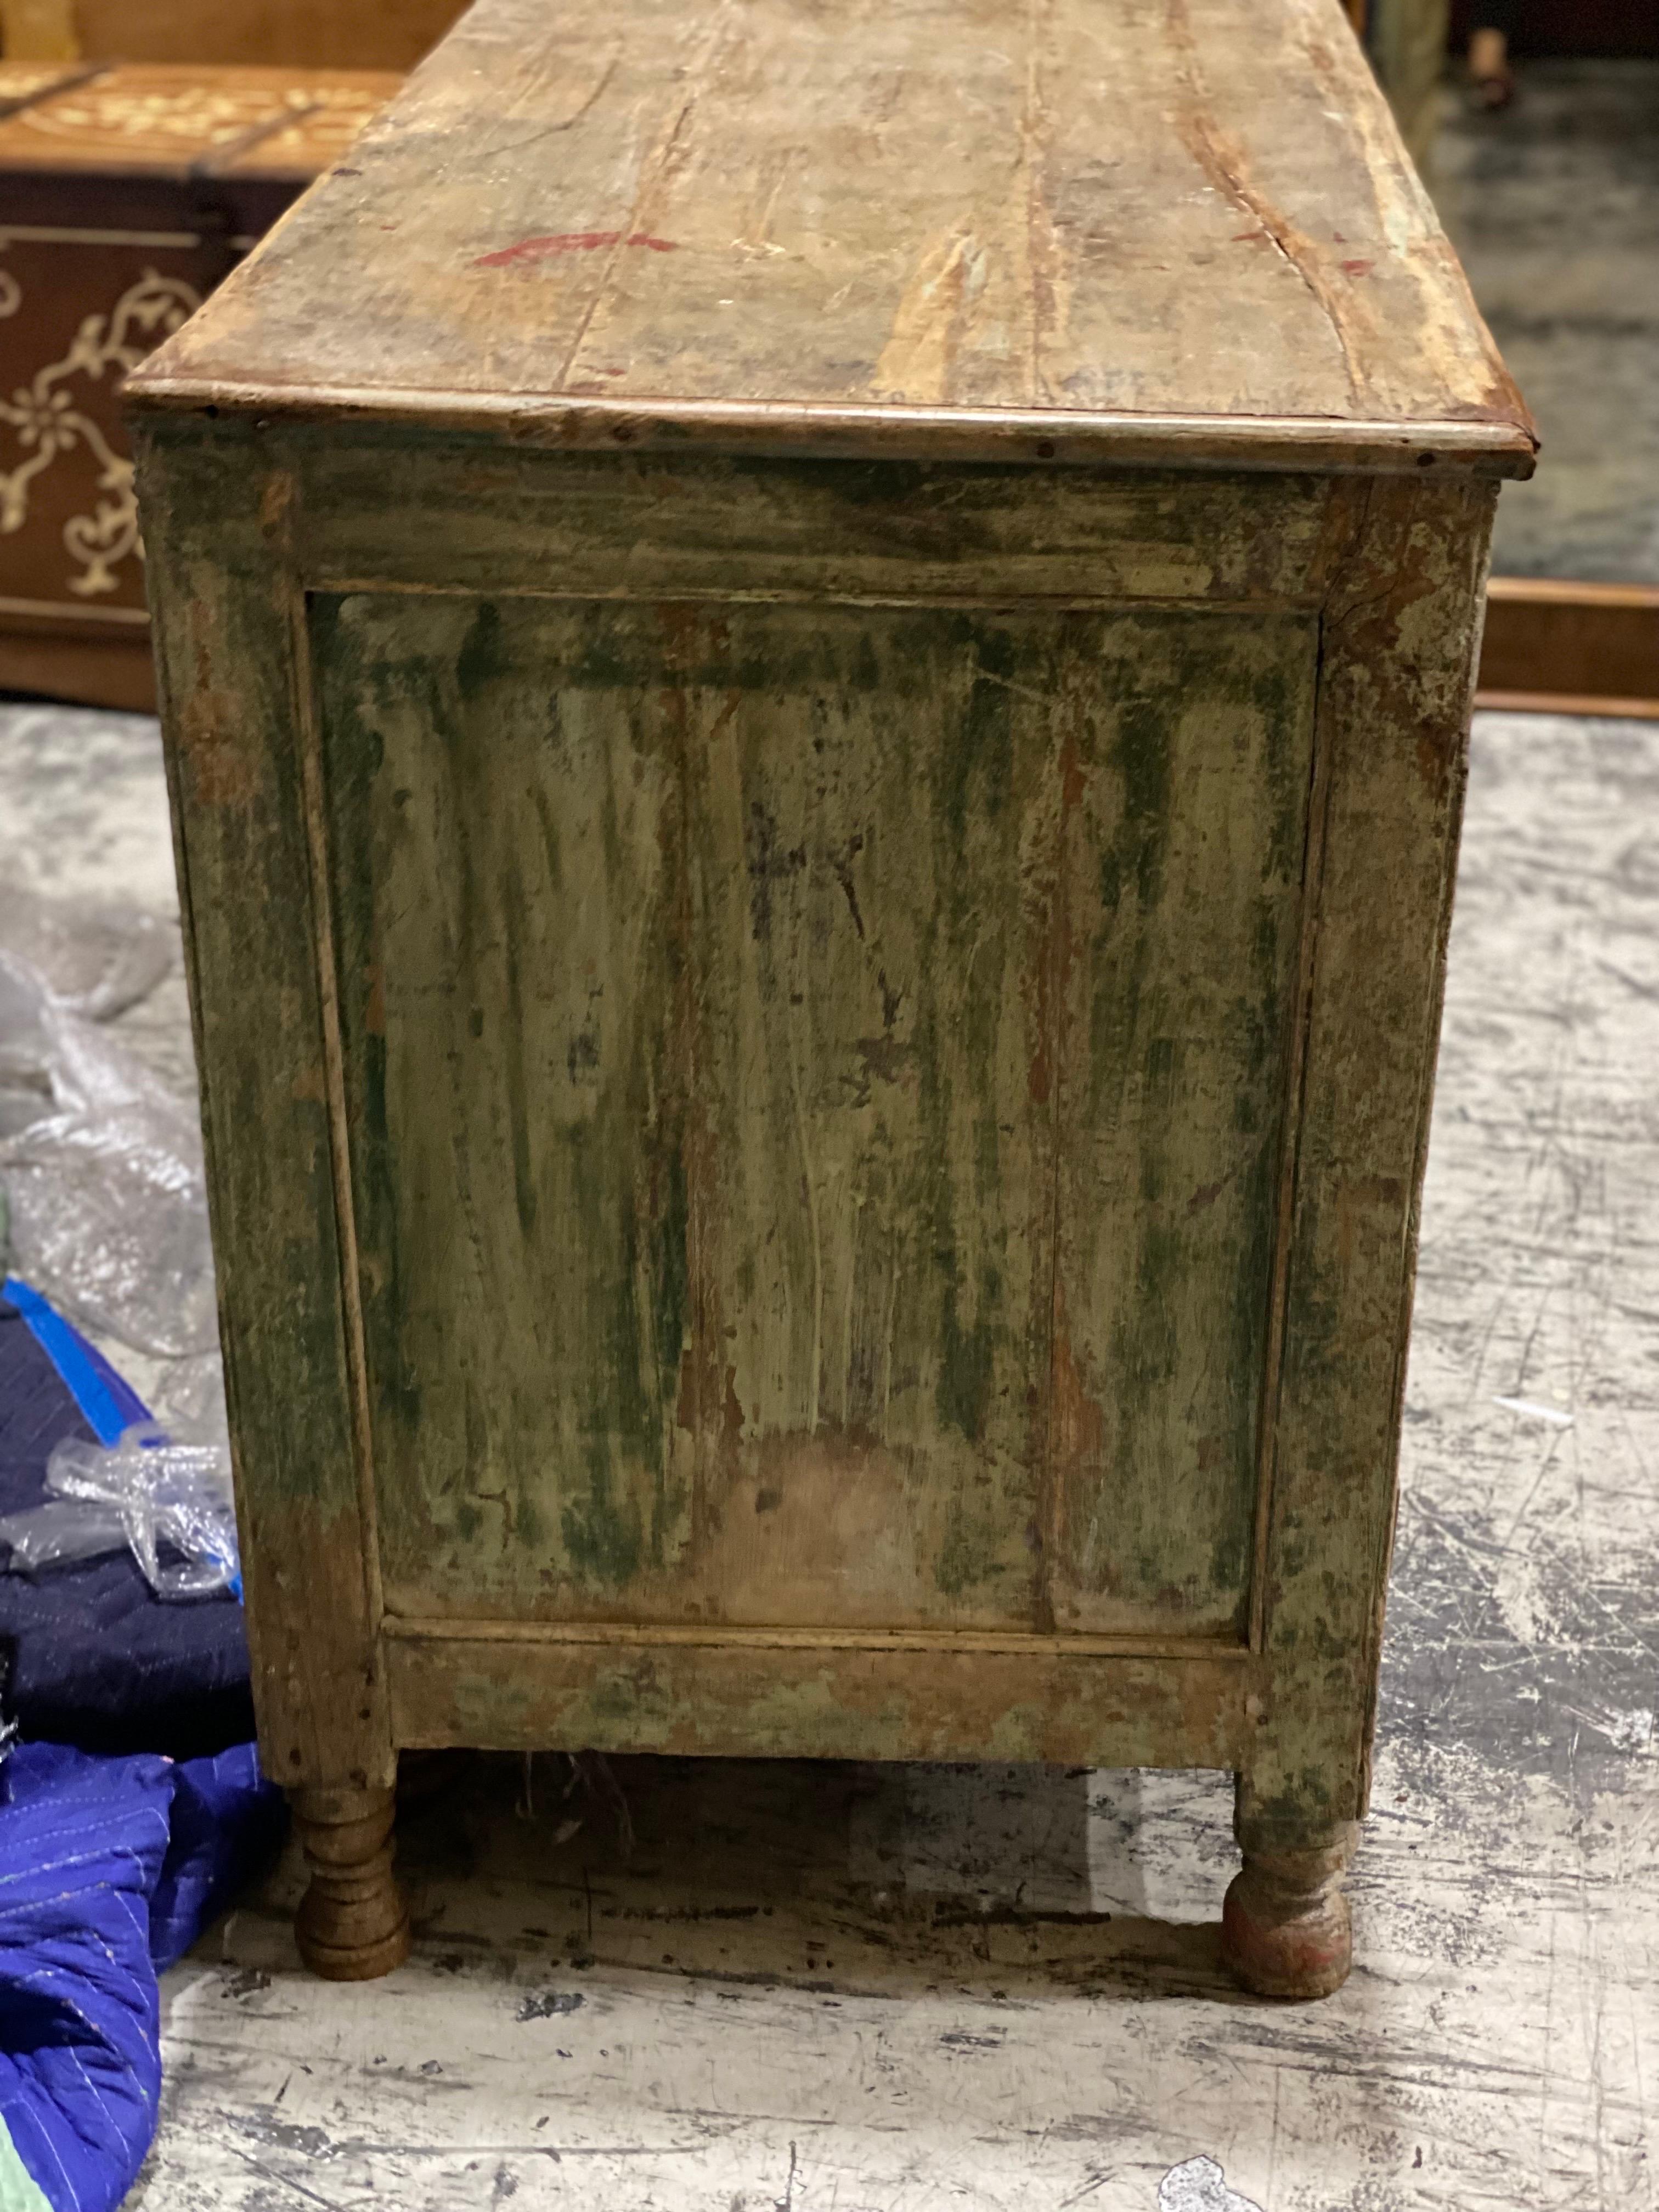 19th C French Provincial Green Painted Carved cabinet 
An unusual carved oval medallion motif with a beautiful aged green patina. One central door and three drawers underneath. One leg slightly uneven but good stable condition. Wear throughout